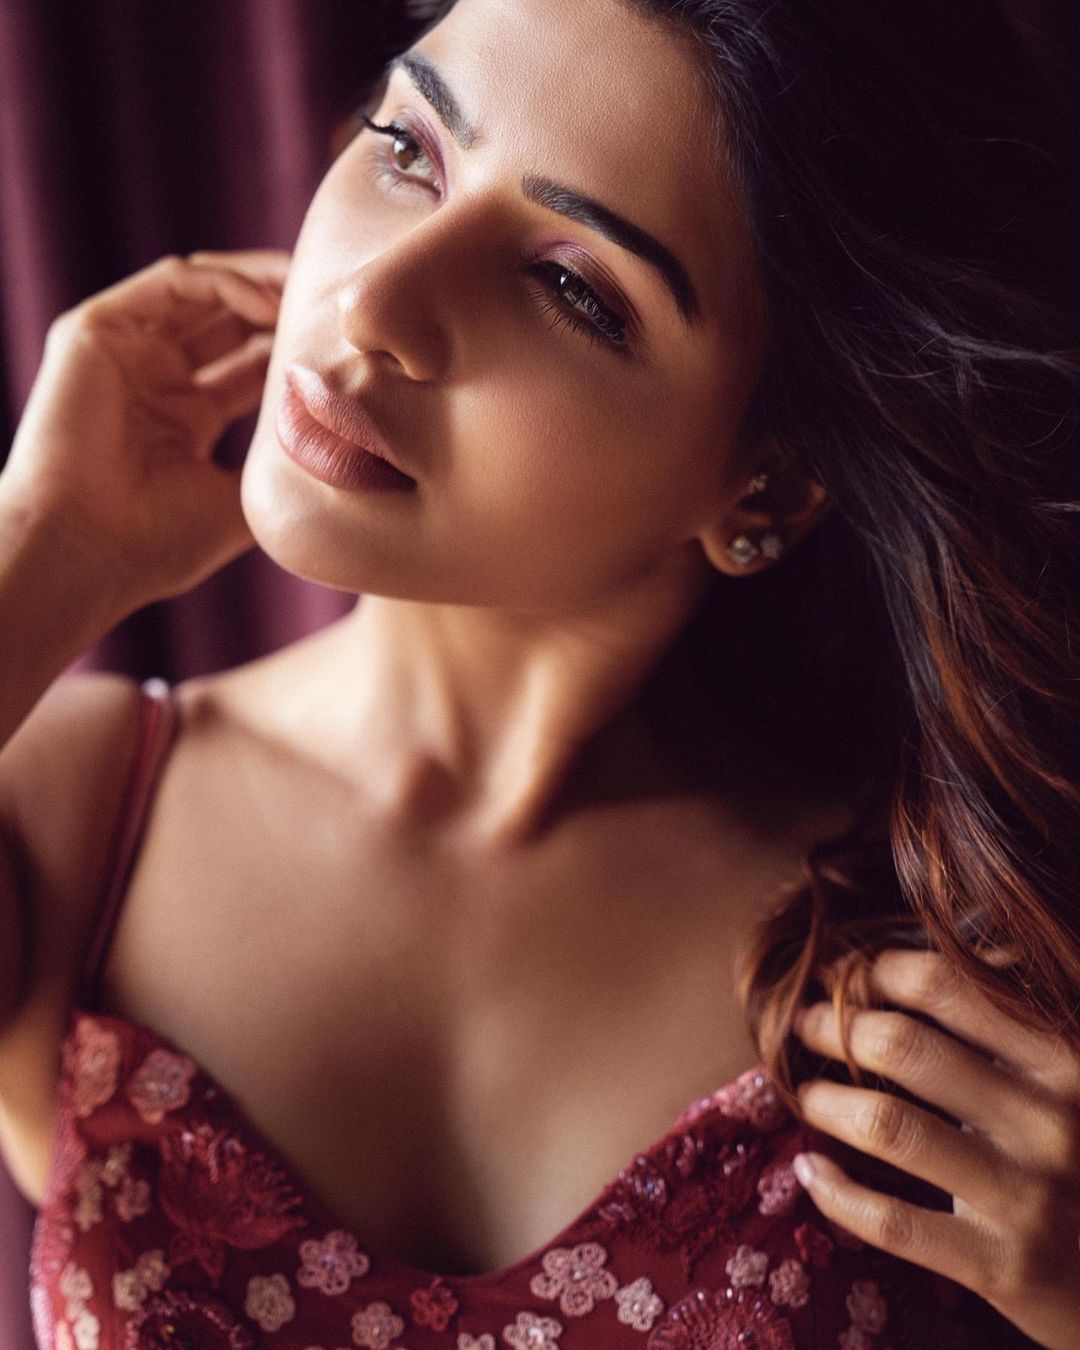 Samantha Akkineni Hot Exposing Cleavage Photo Gallery Photos Hd Images Pictures Stills First